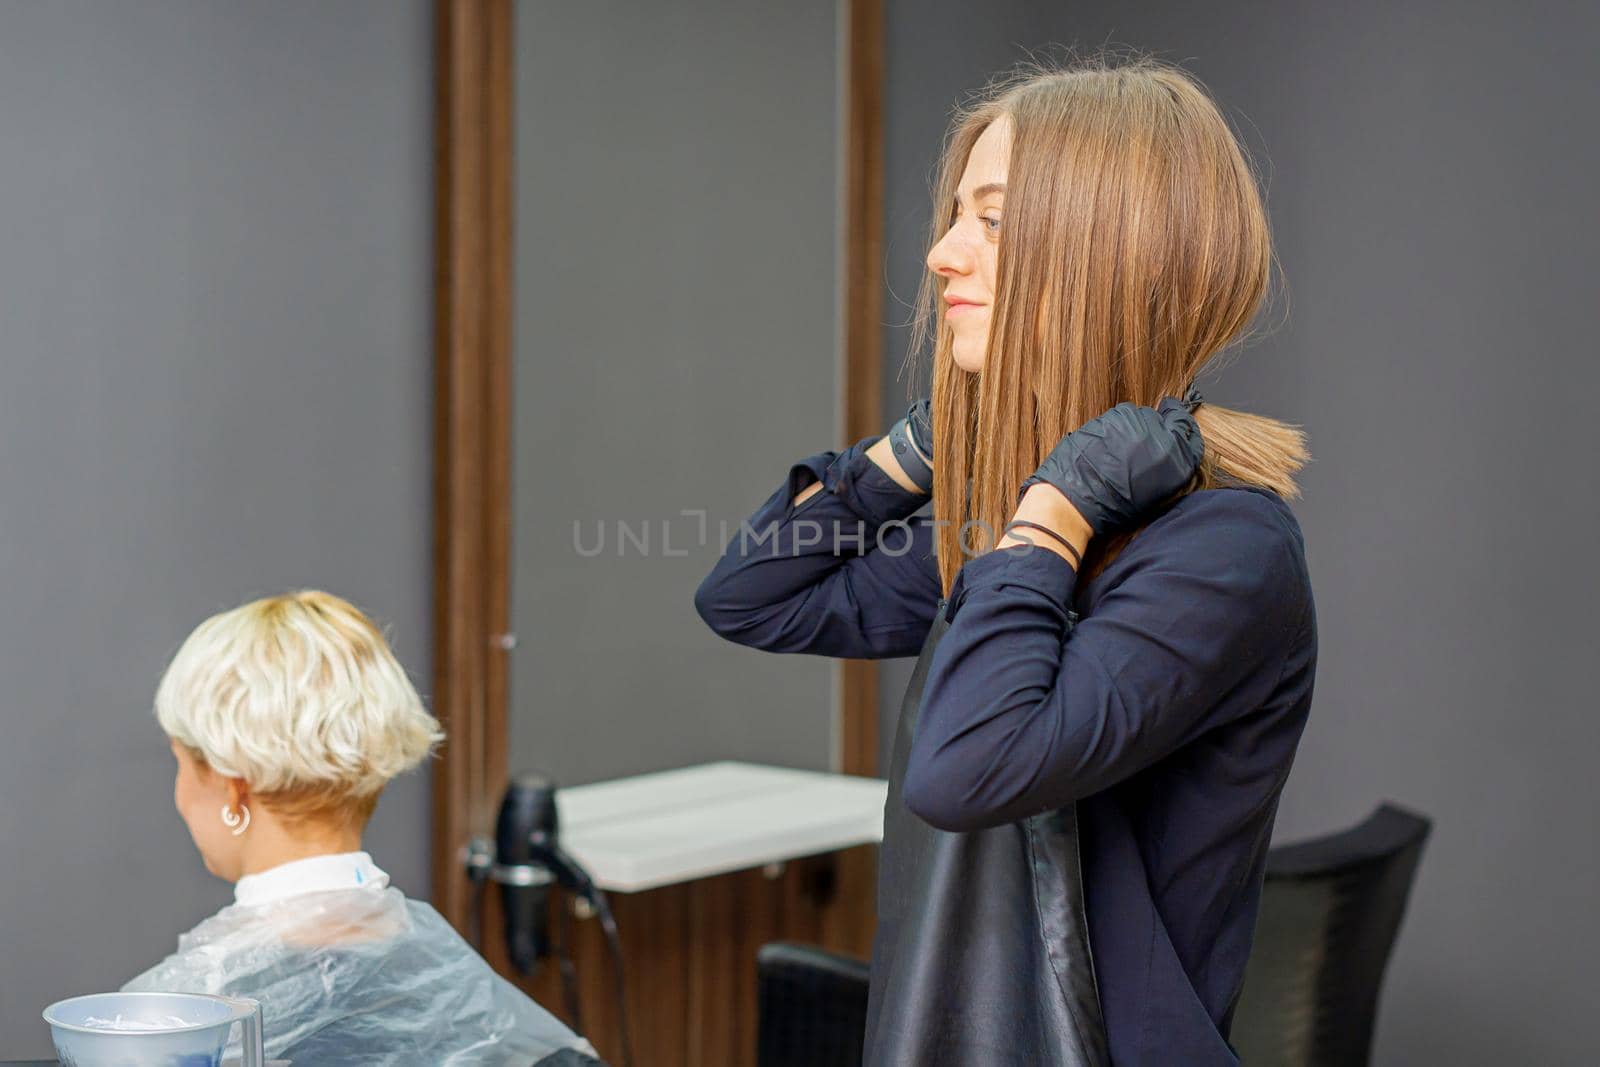 Female hairdresser puts on black apron before cutting the client's hair